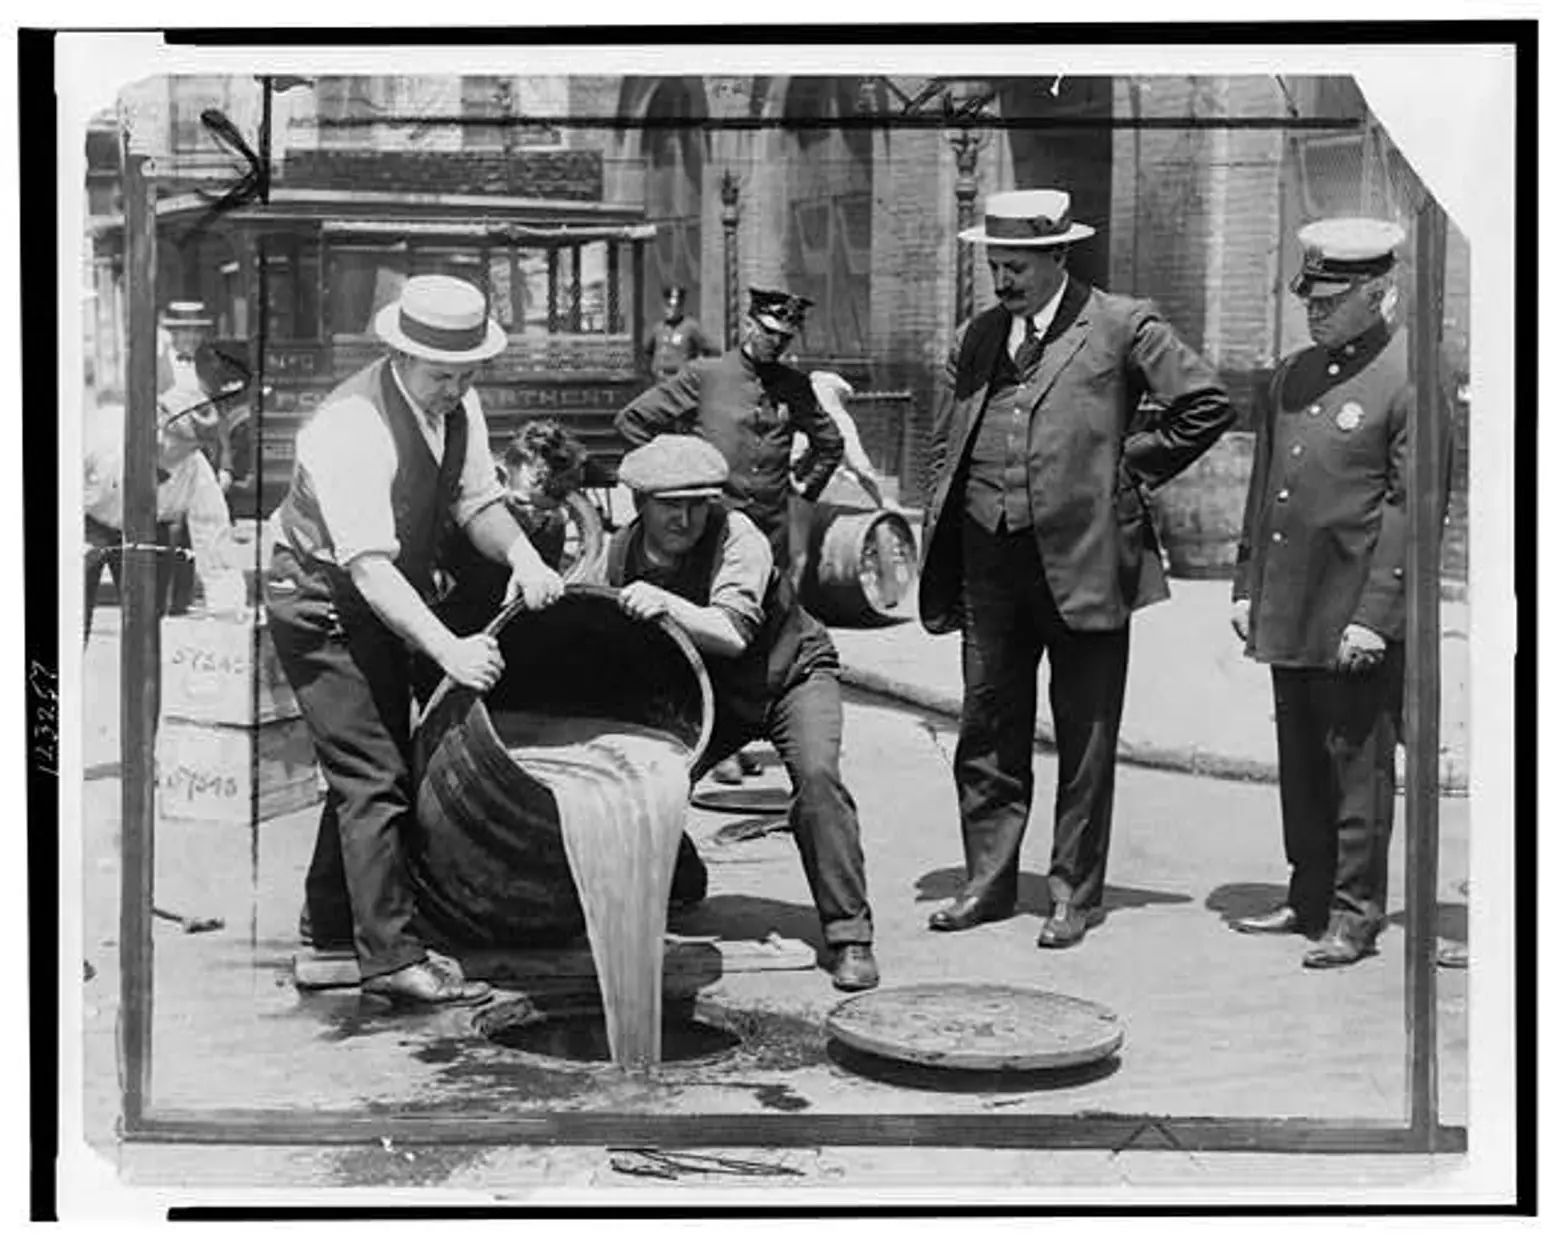 Alcohol getting poured into sewer in NYC, 1920